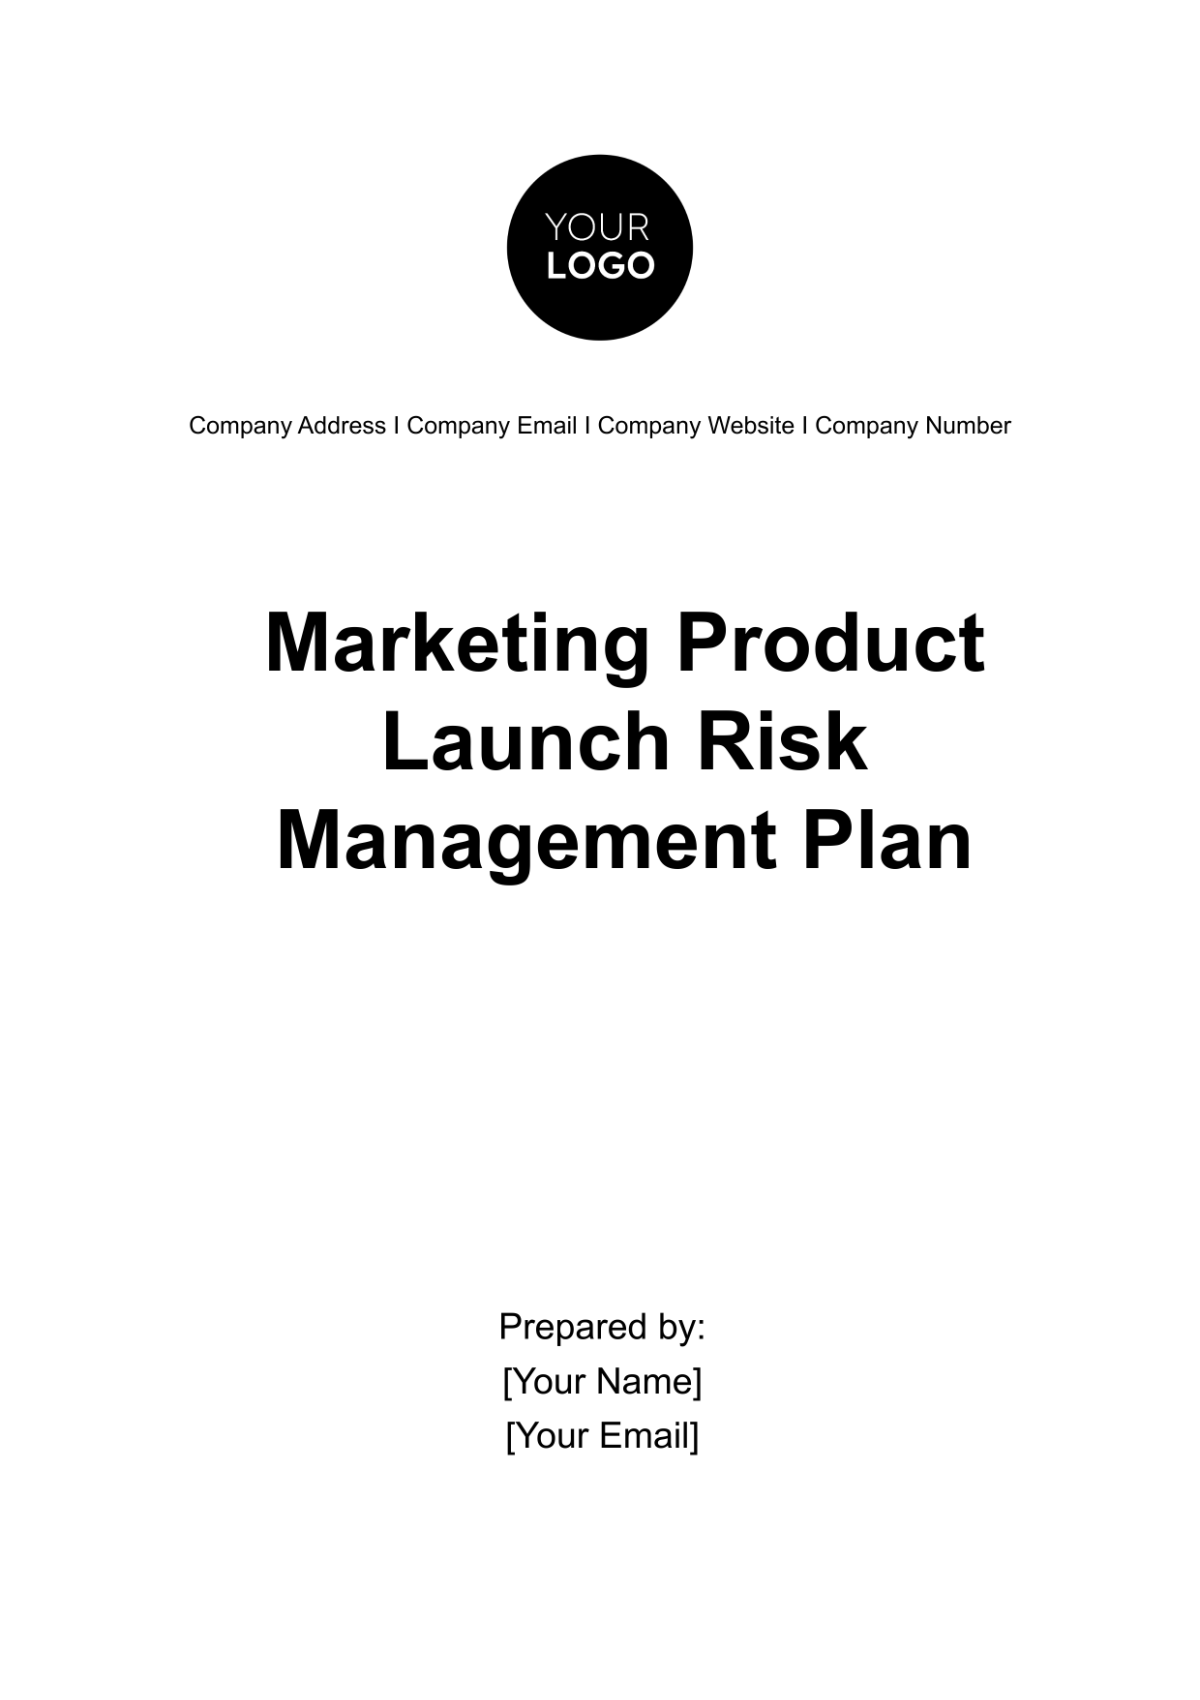 Marketing Product Launch Risk Management Plan Template